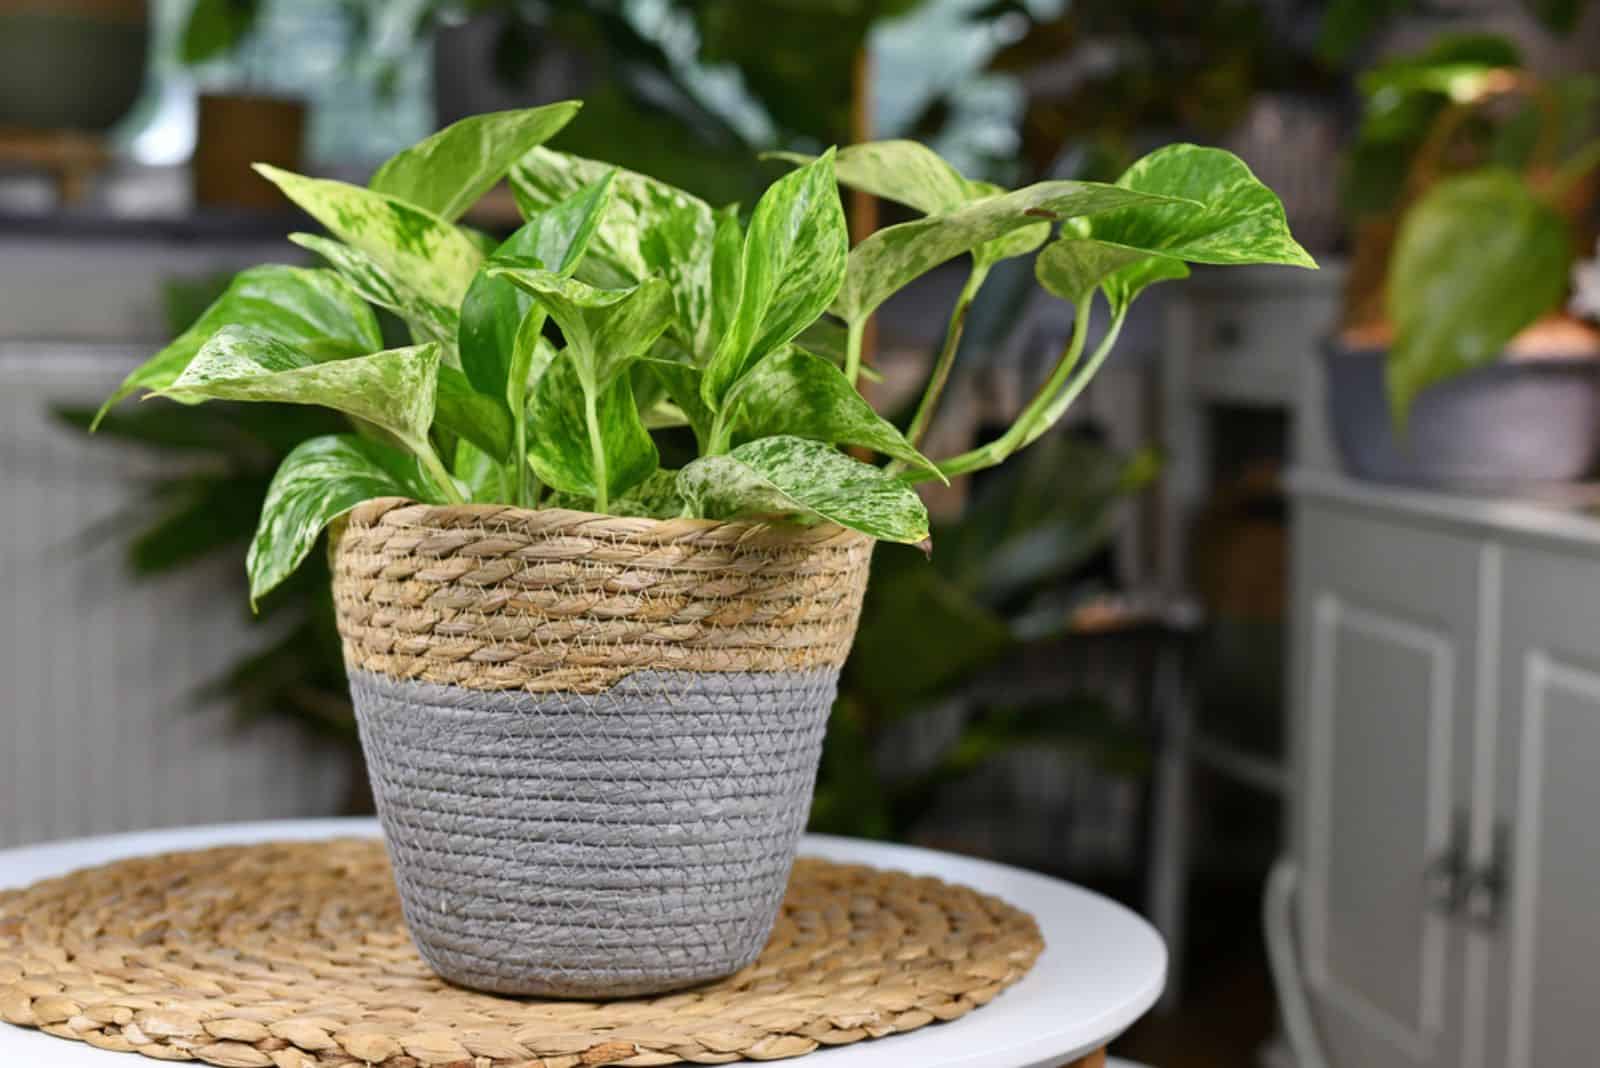 Pothos plant with variagated leaves